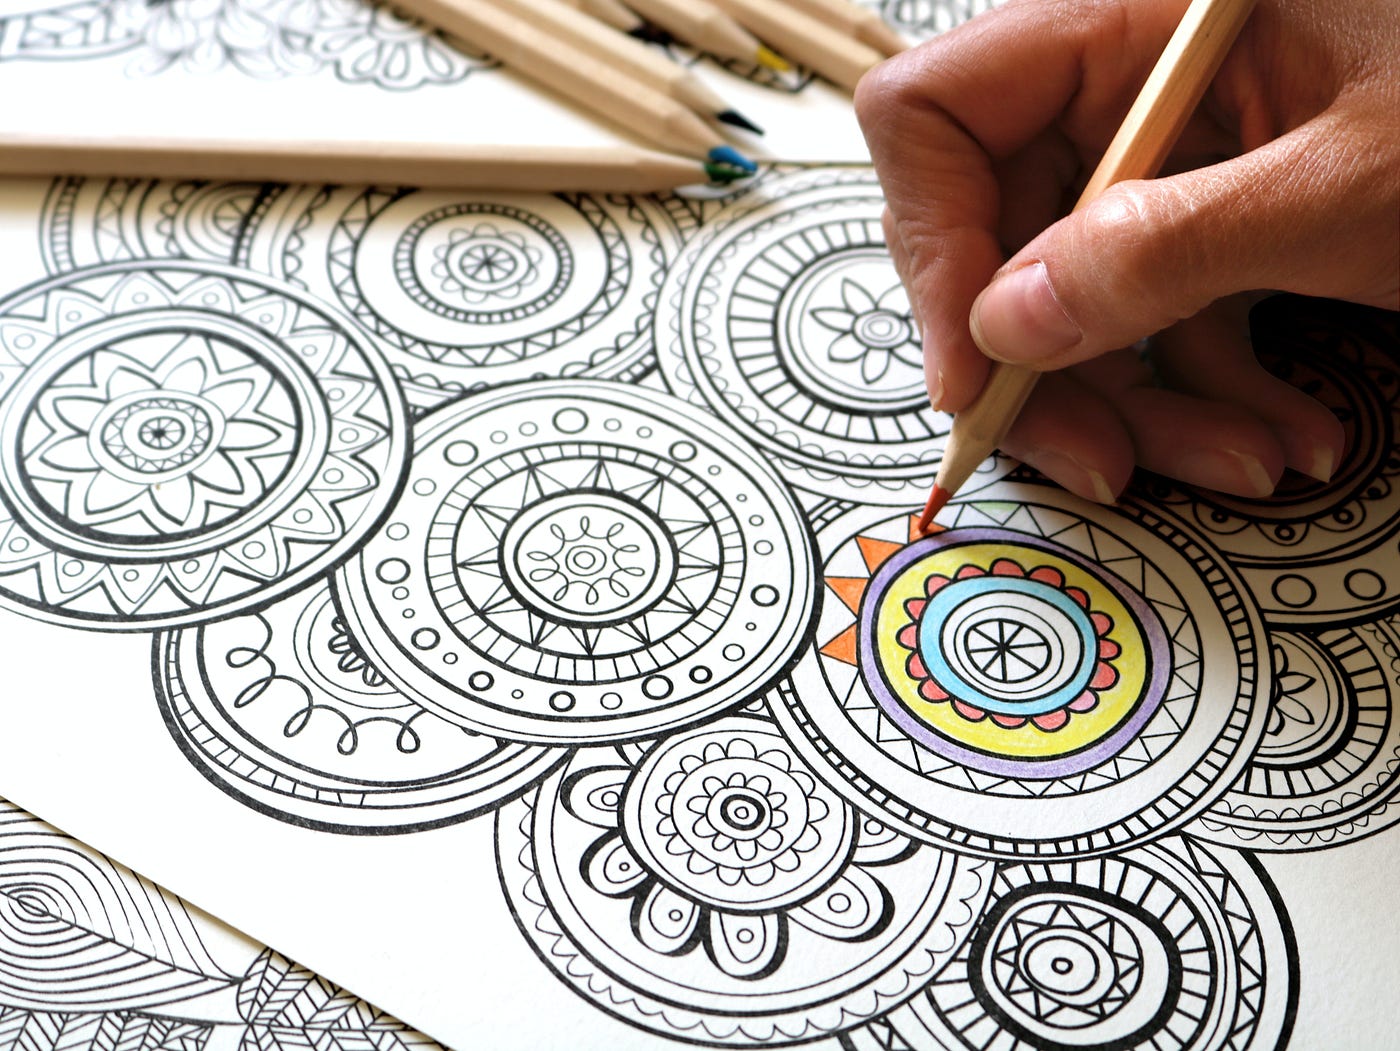 How to Use Colored Pencils in Adult Coloring Pages - 10 Tips for Beginners  